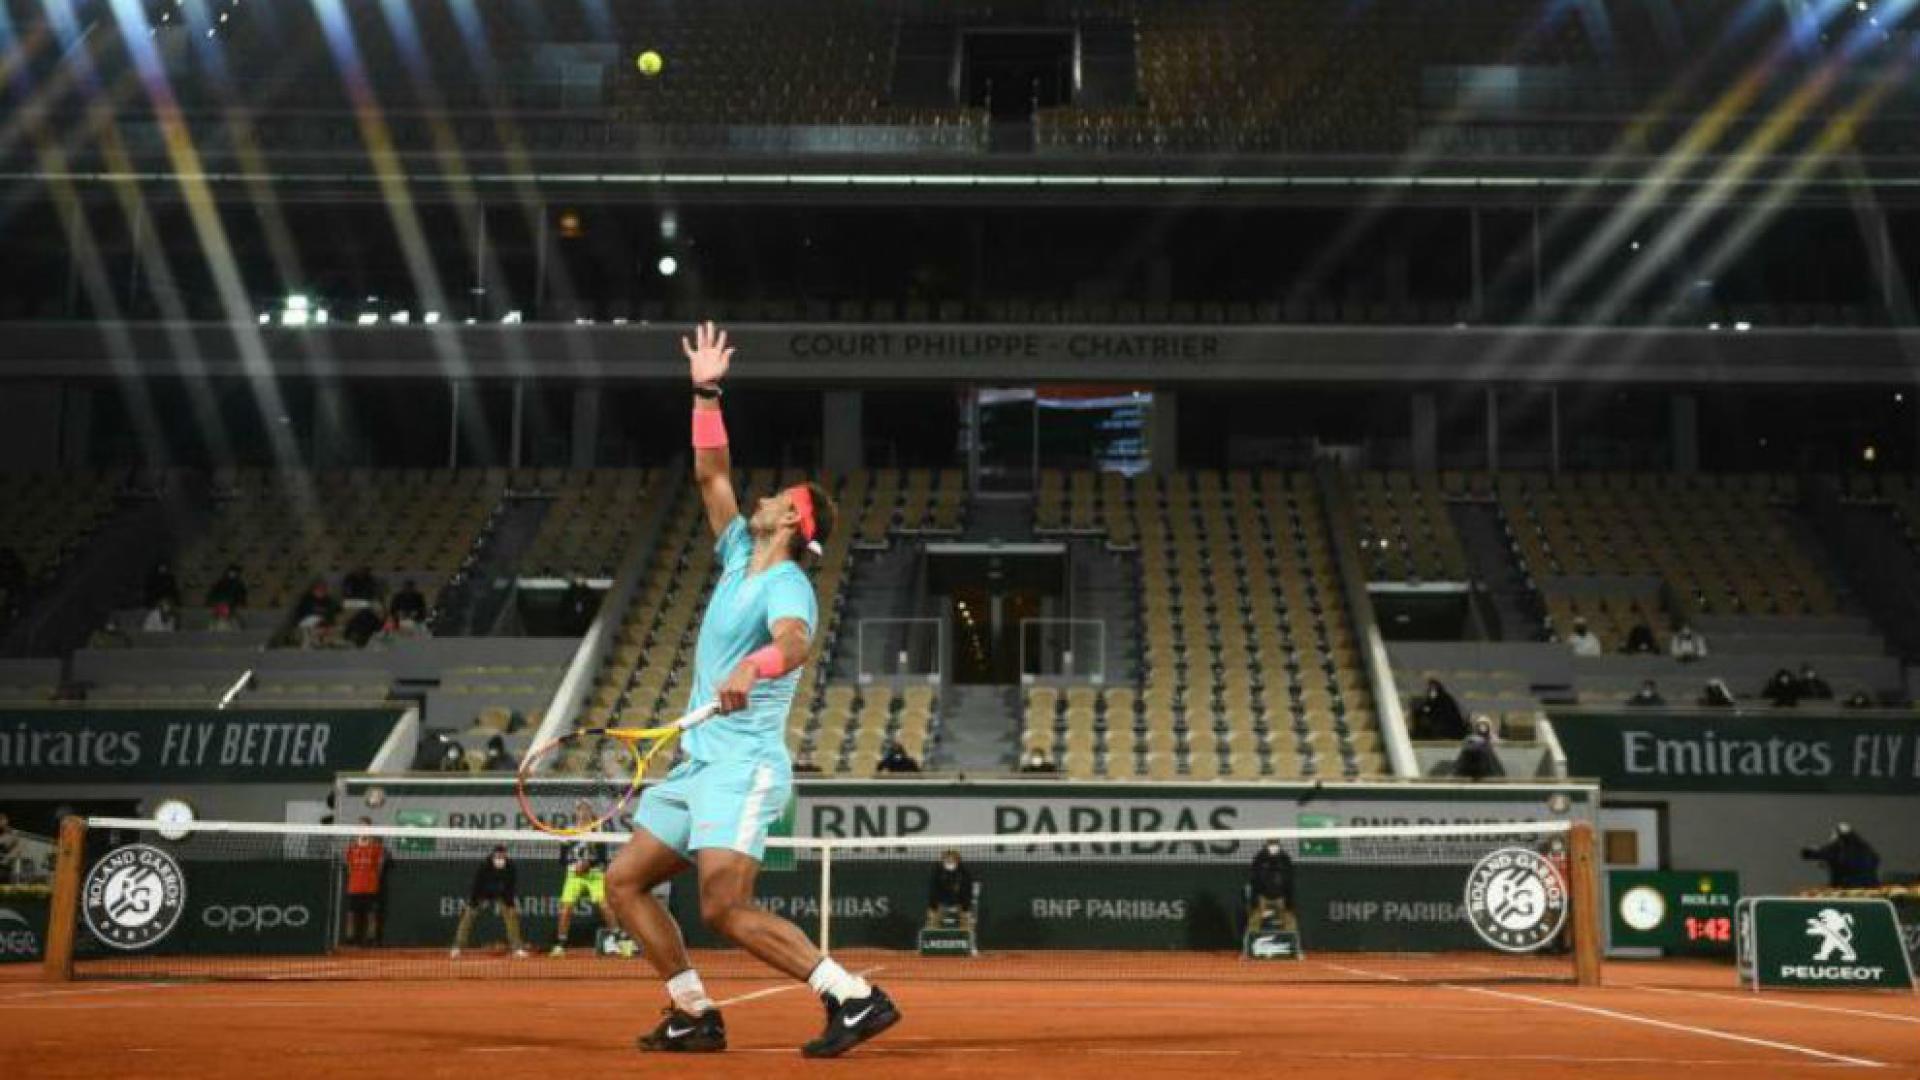 Roland Garros 2021 will have the evening session